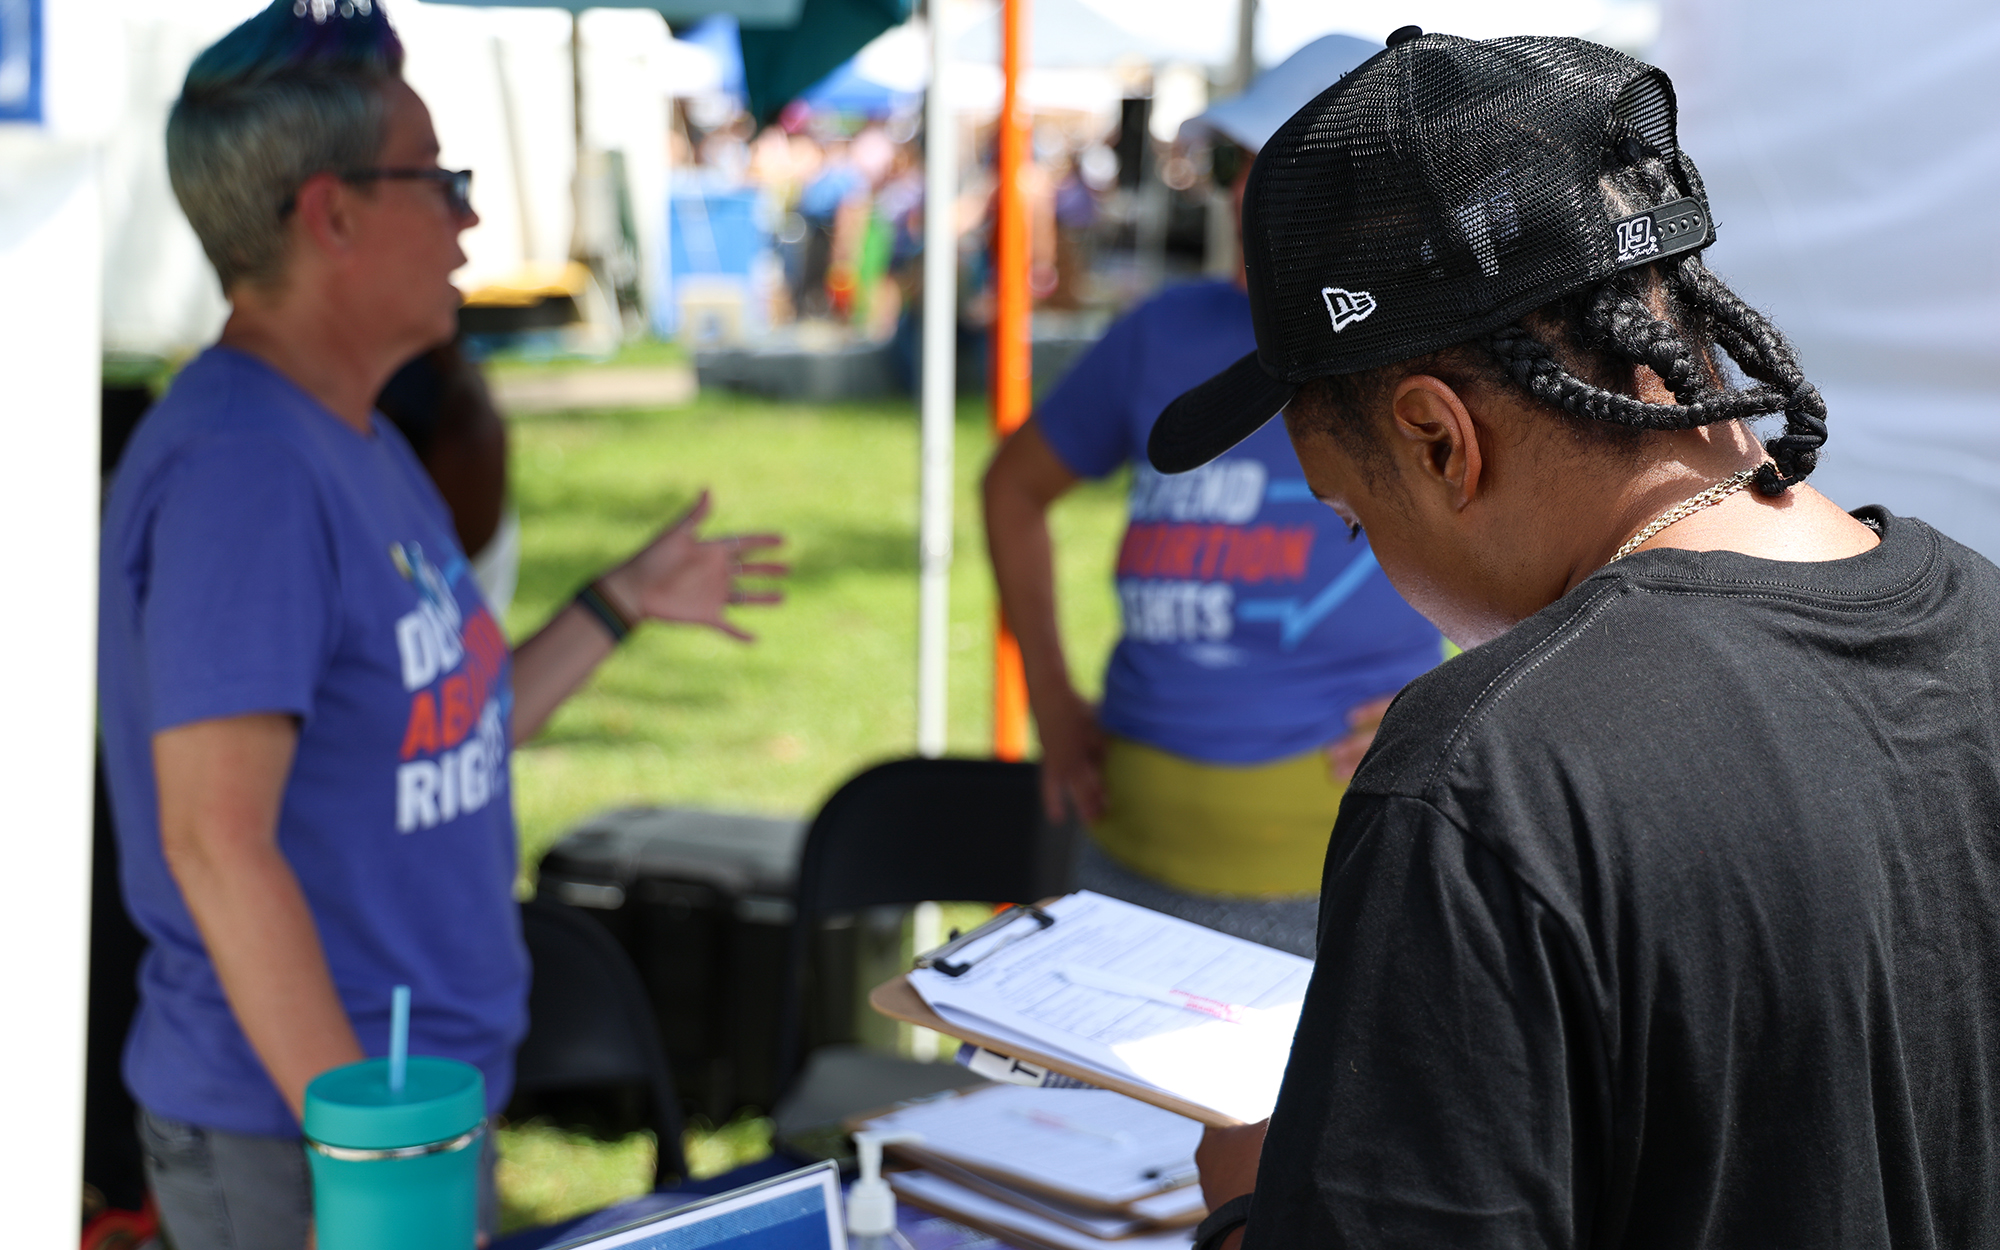 Amber Holman, right, signs a petition for the proposed “Right to Reproductive Freedom” amendment at a community festival in Columbus on June 25, 2023. In November, Ohio voters will decide whether to enshrine abortion rights in the state constitution. (Photo by Maddy Keyes/ News21)